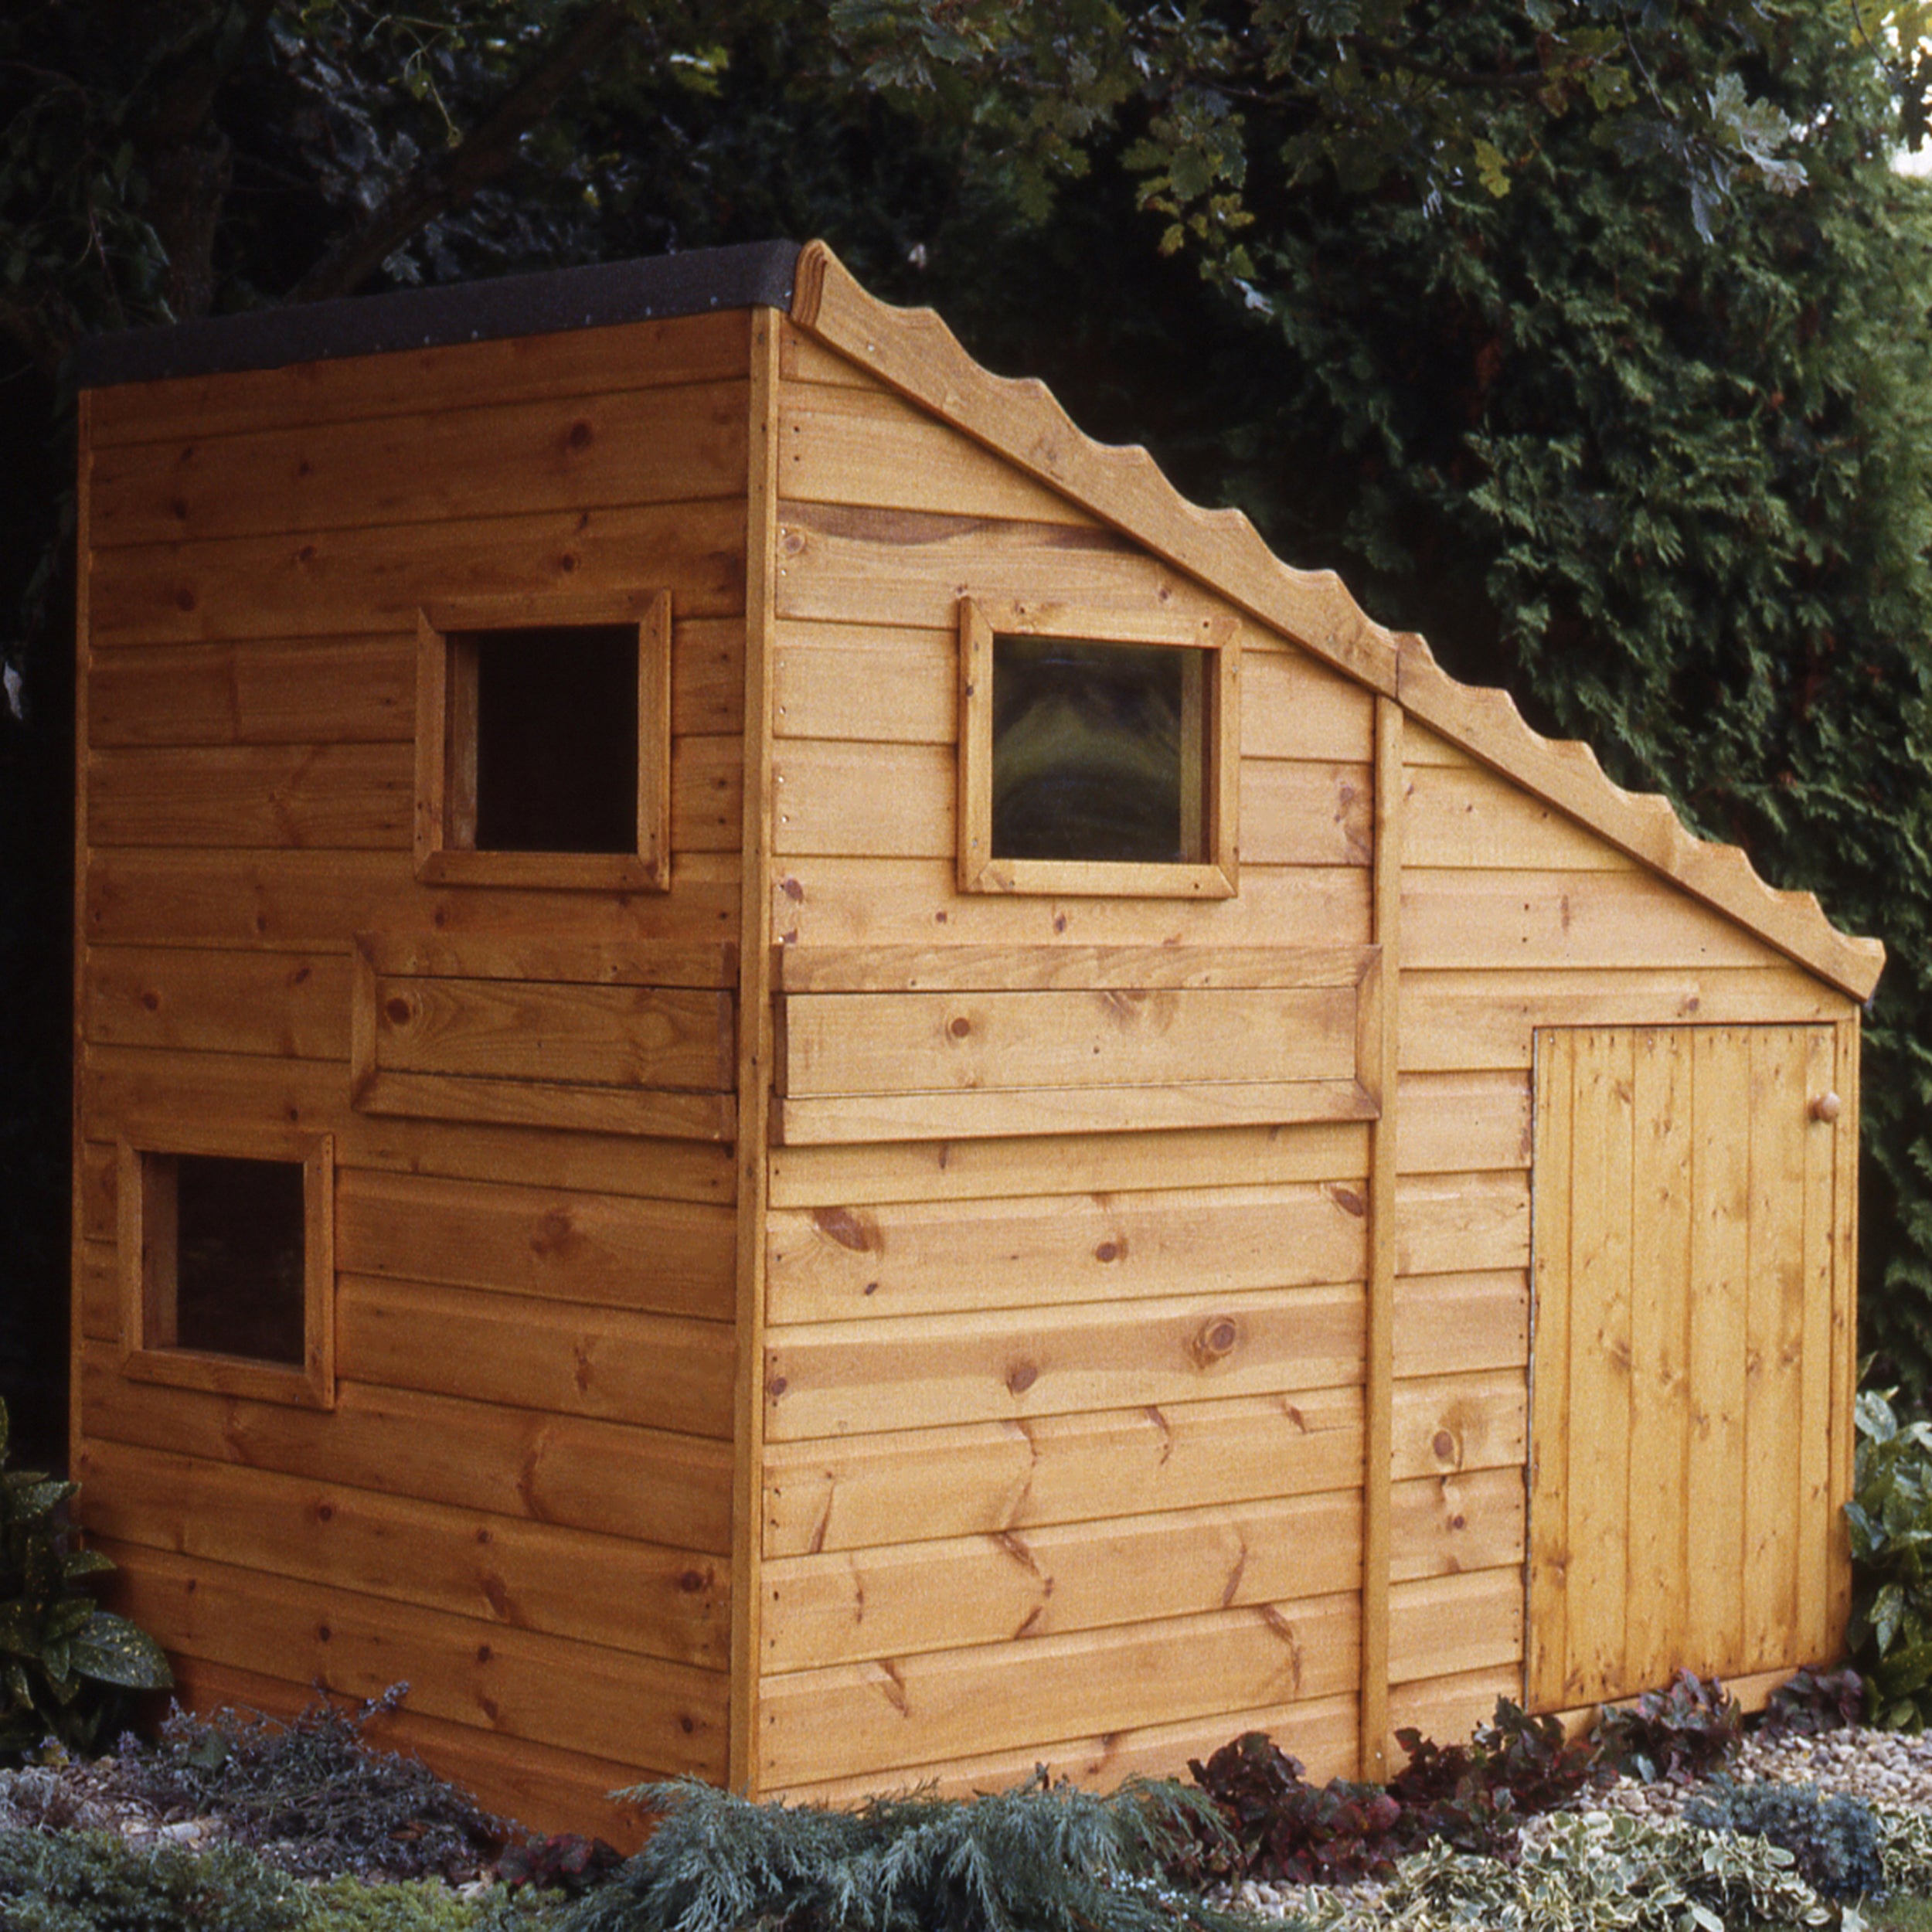 Shire Command Post Playhouse 6x4 - Garden Life Stores. 